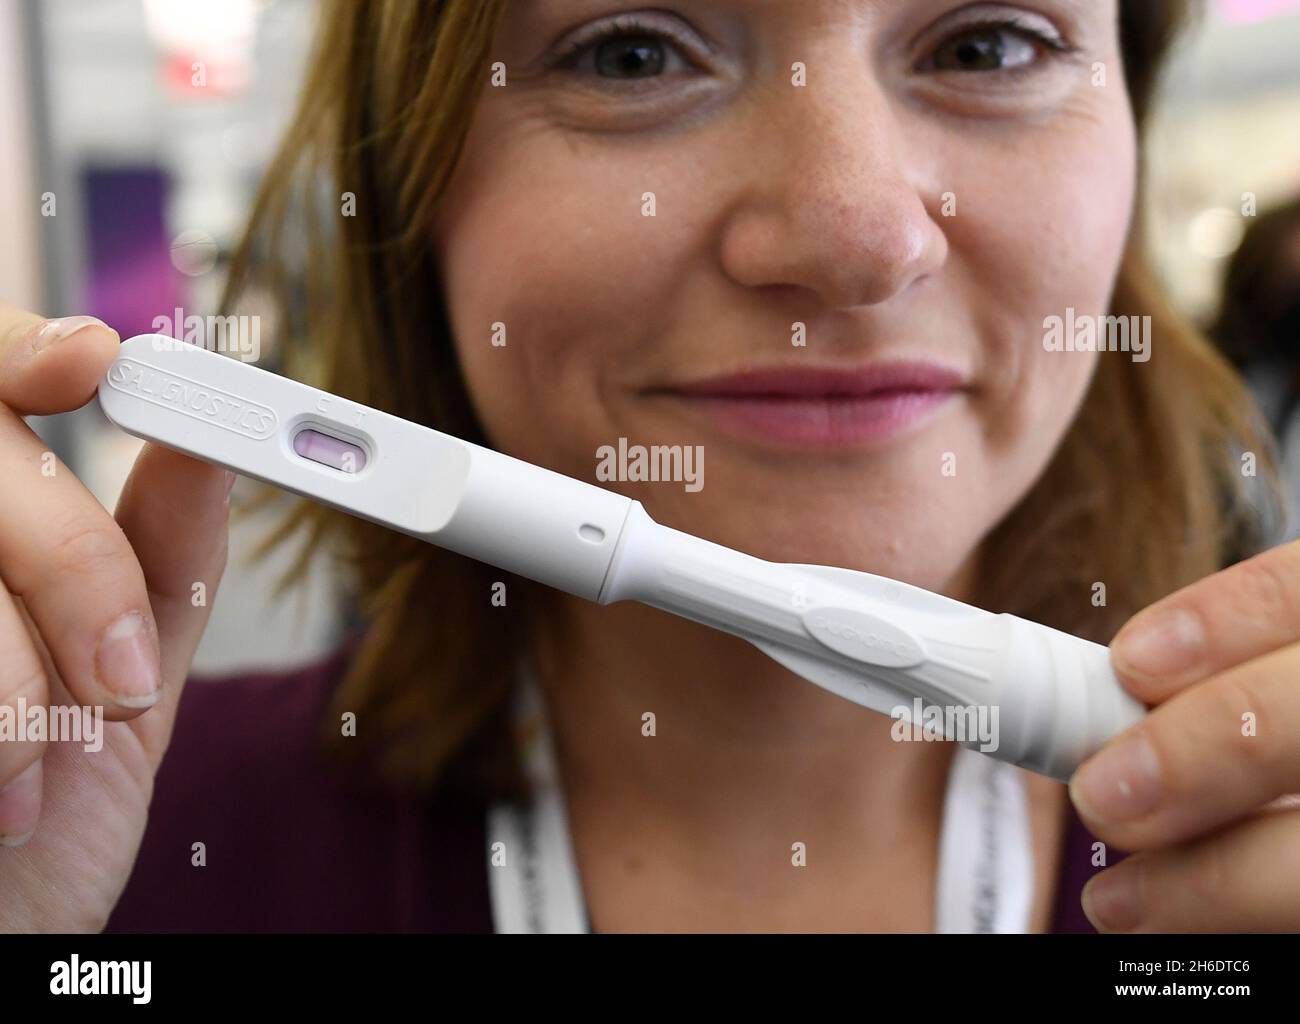 Duesseldorf, Germany. 15th Nov, 2021. The Israeli company Salignostics is  presenting a pregnancy test (SaliStick) at Medica that works with saliva.  Stick in the mouth and after a few minutes the woman